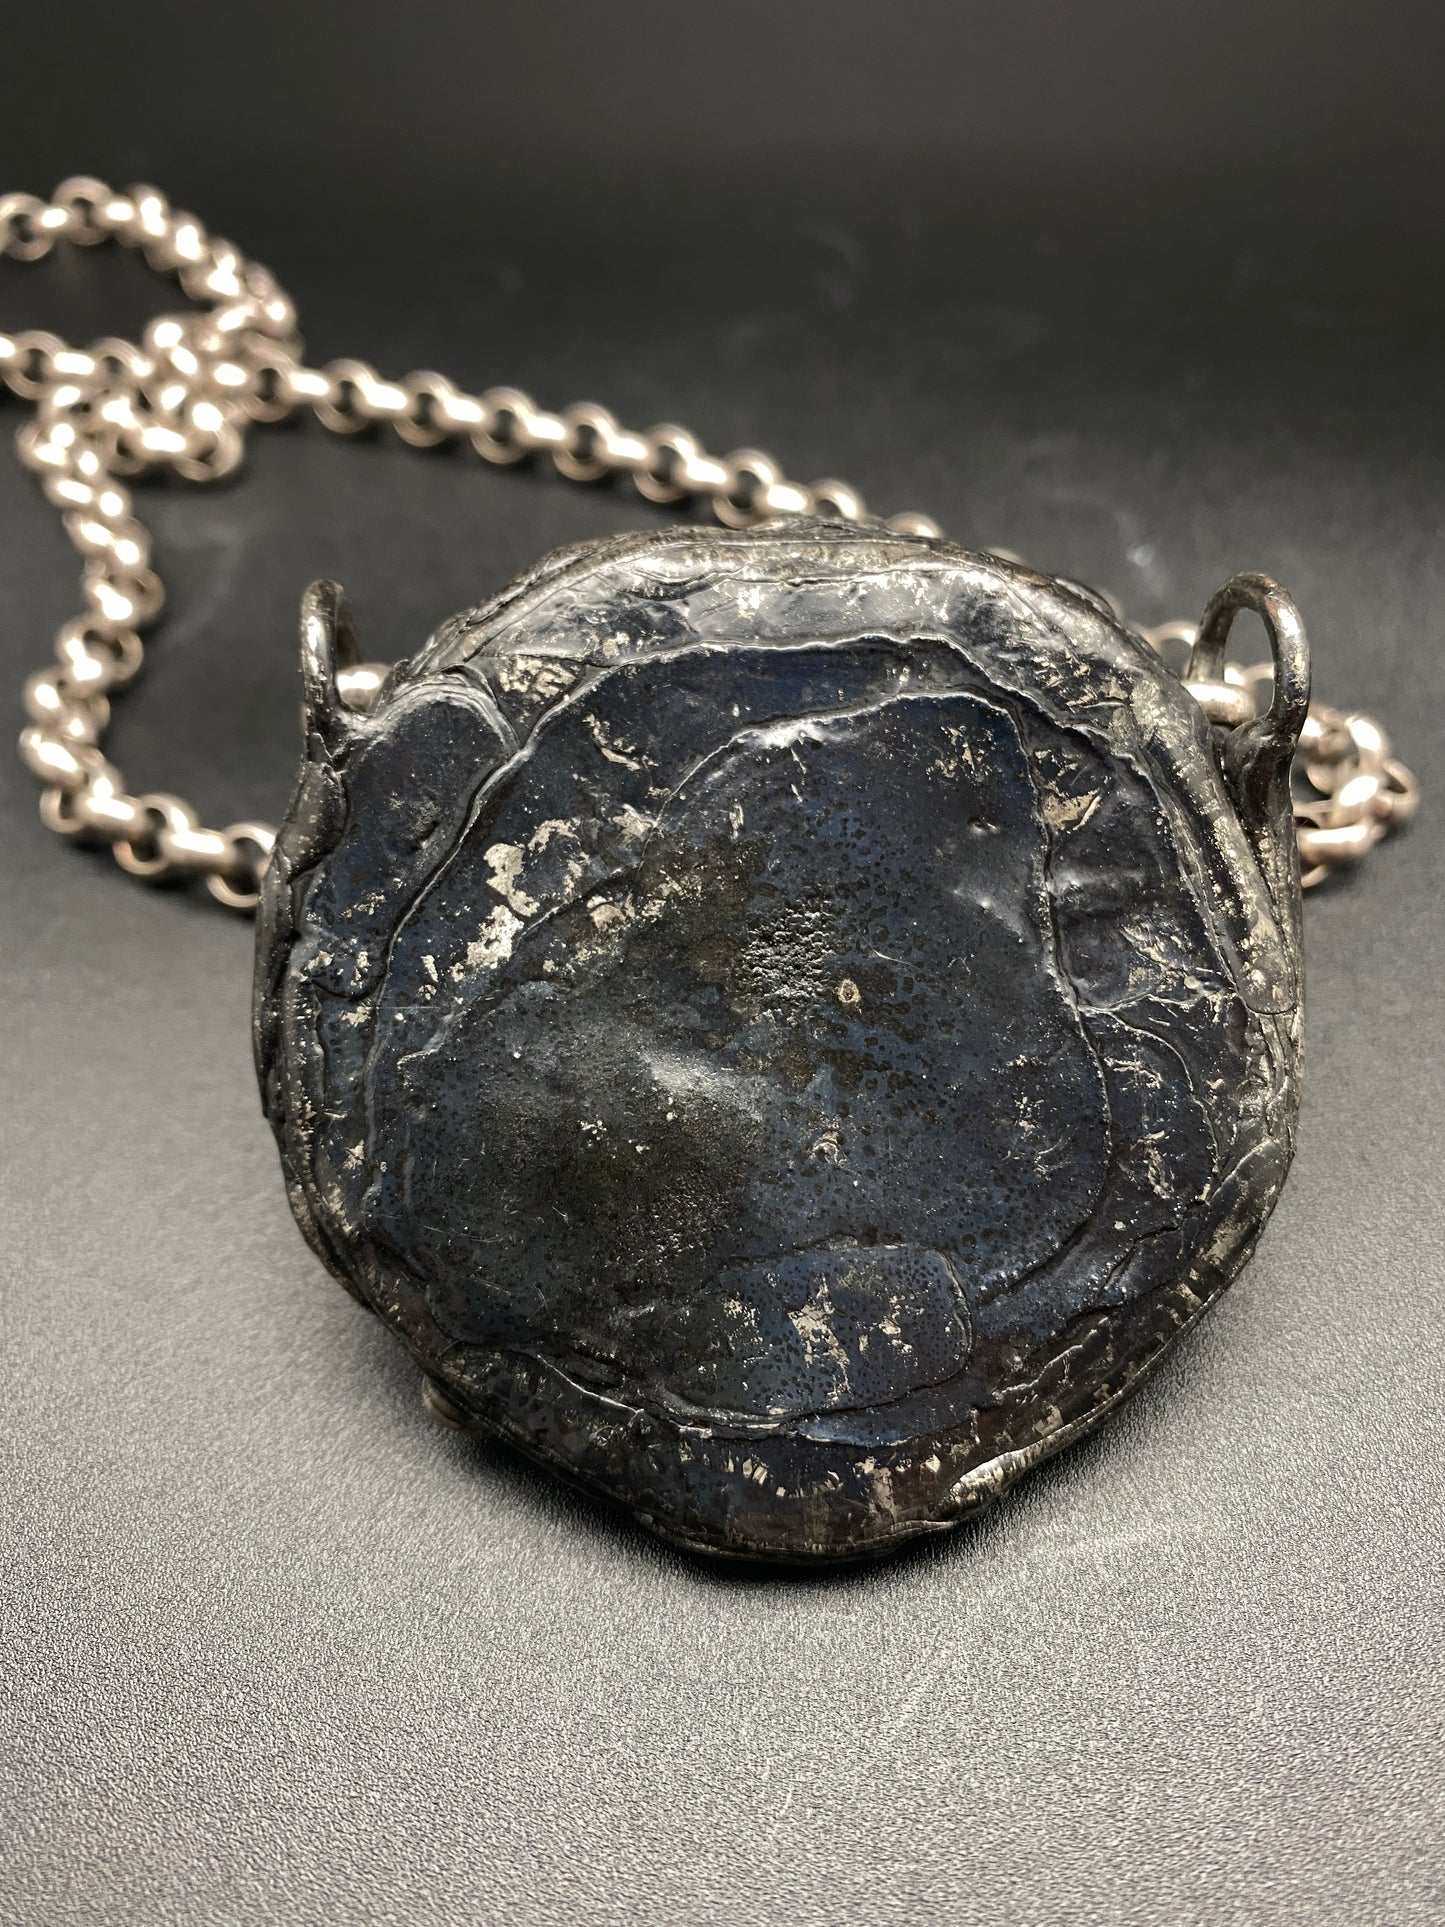 Ashore ~ Fossil Sand Dollar Necklace